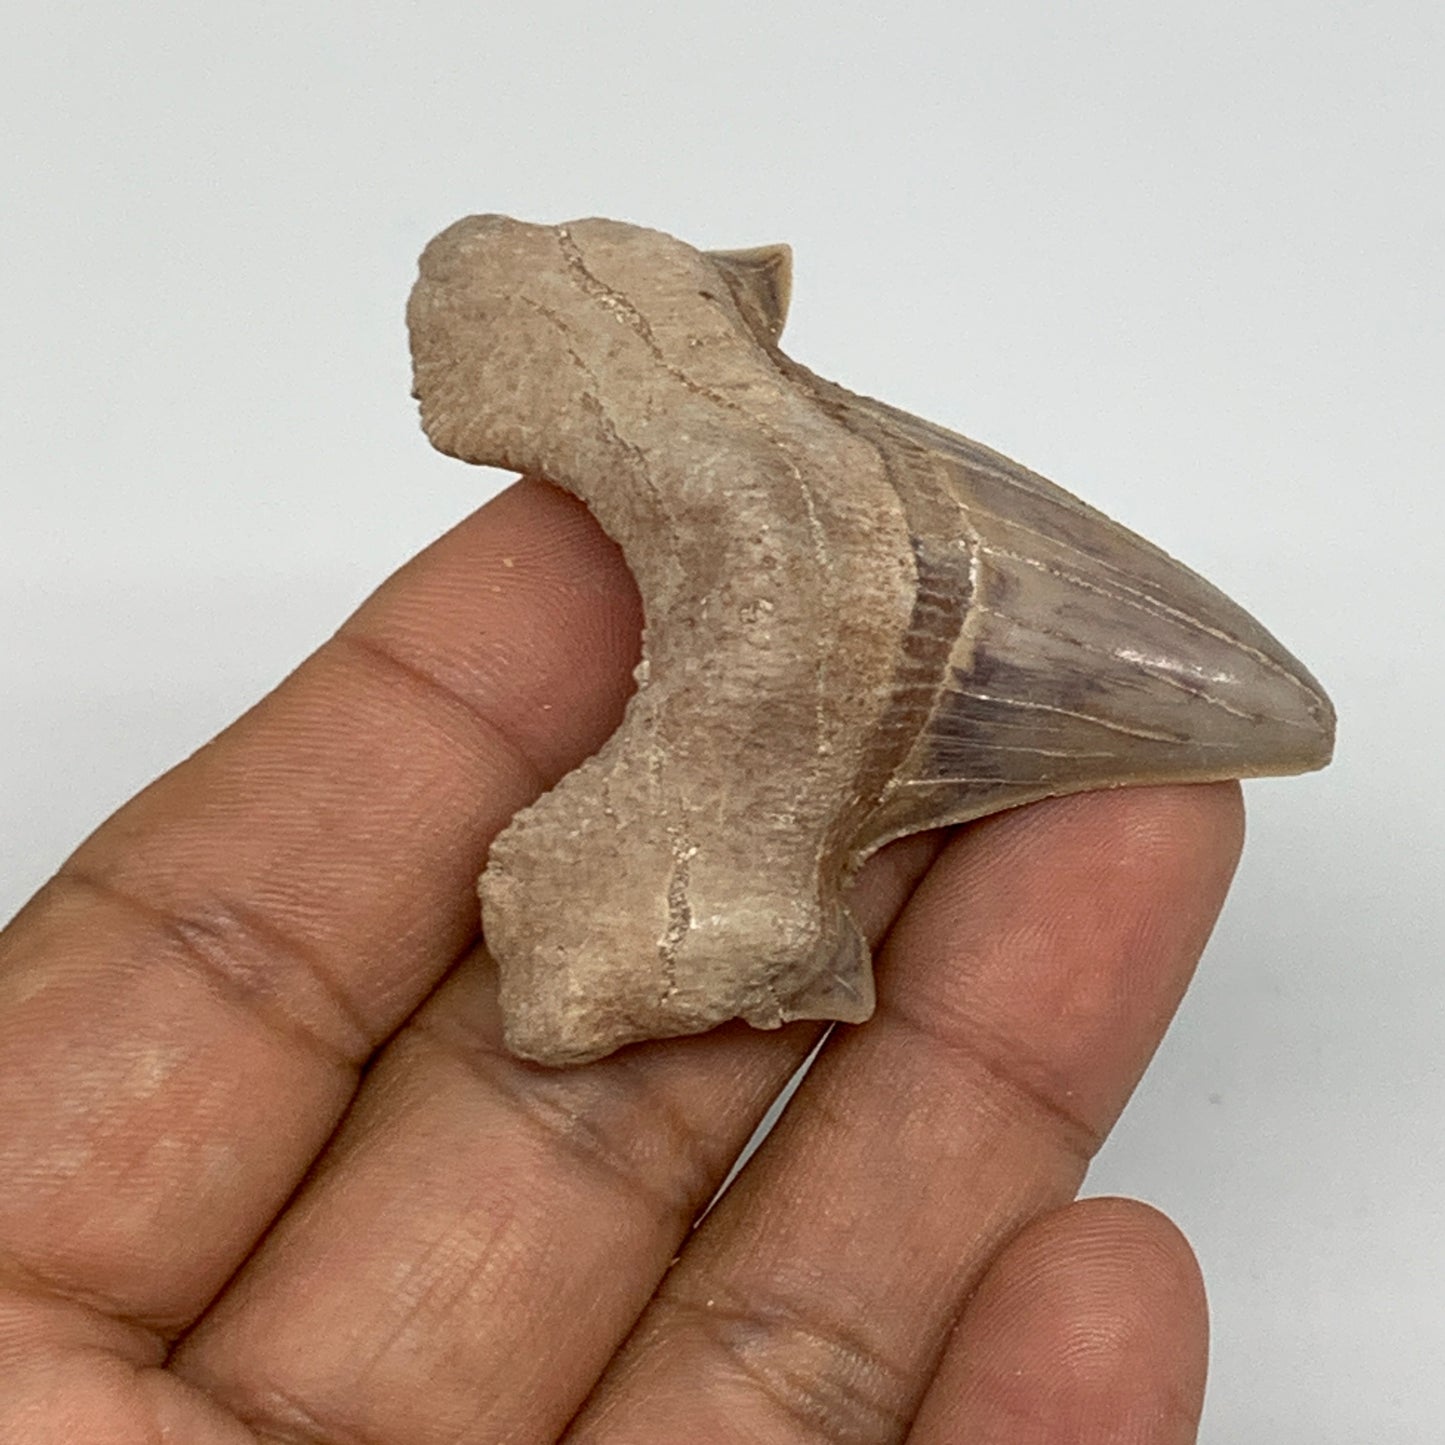 22.9g, 2"X 1.9"x 0.6" Natural Fossils Fish Shark Tooth @Morocco, B12700